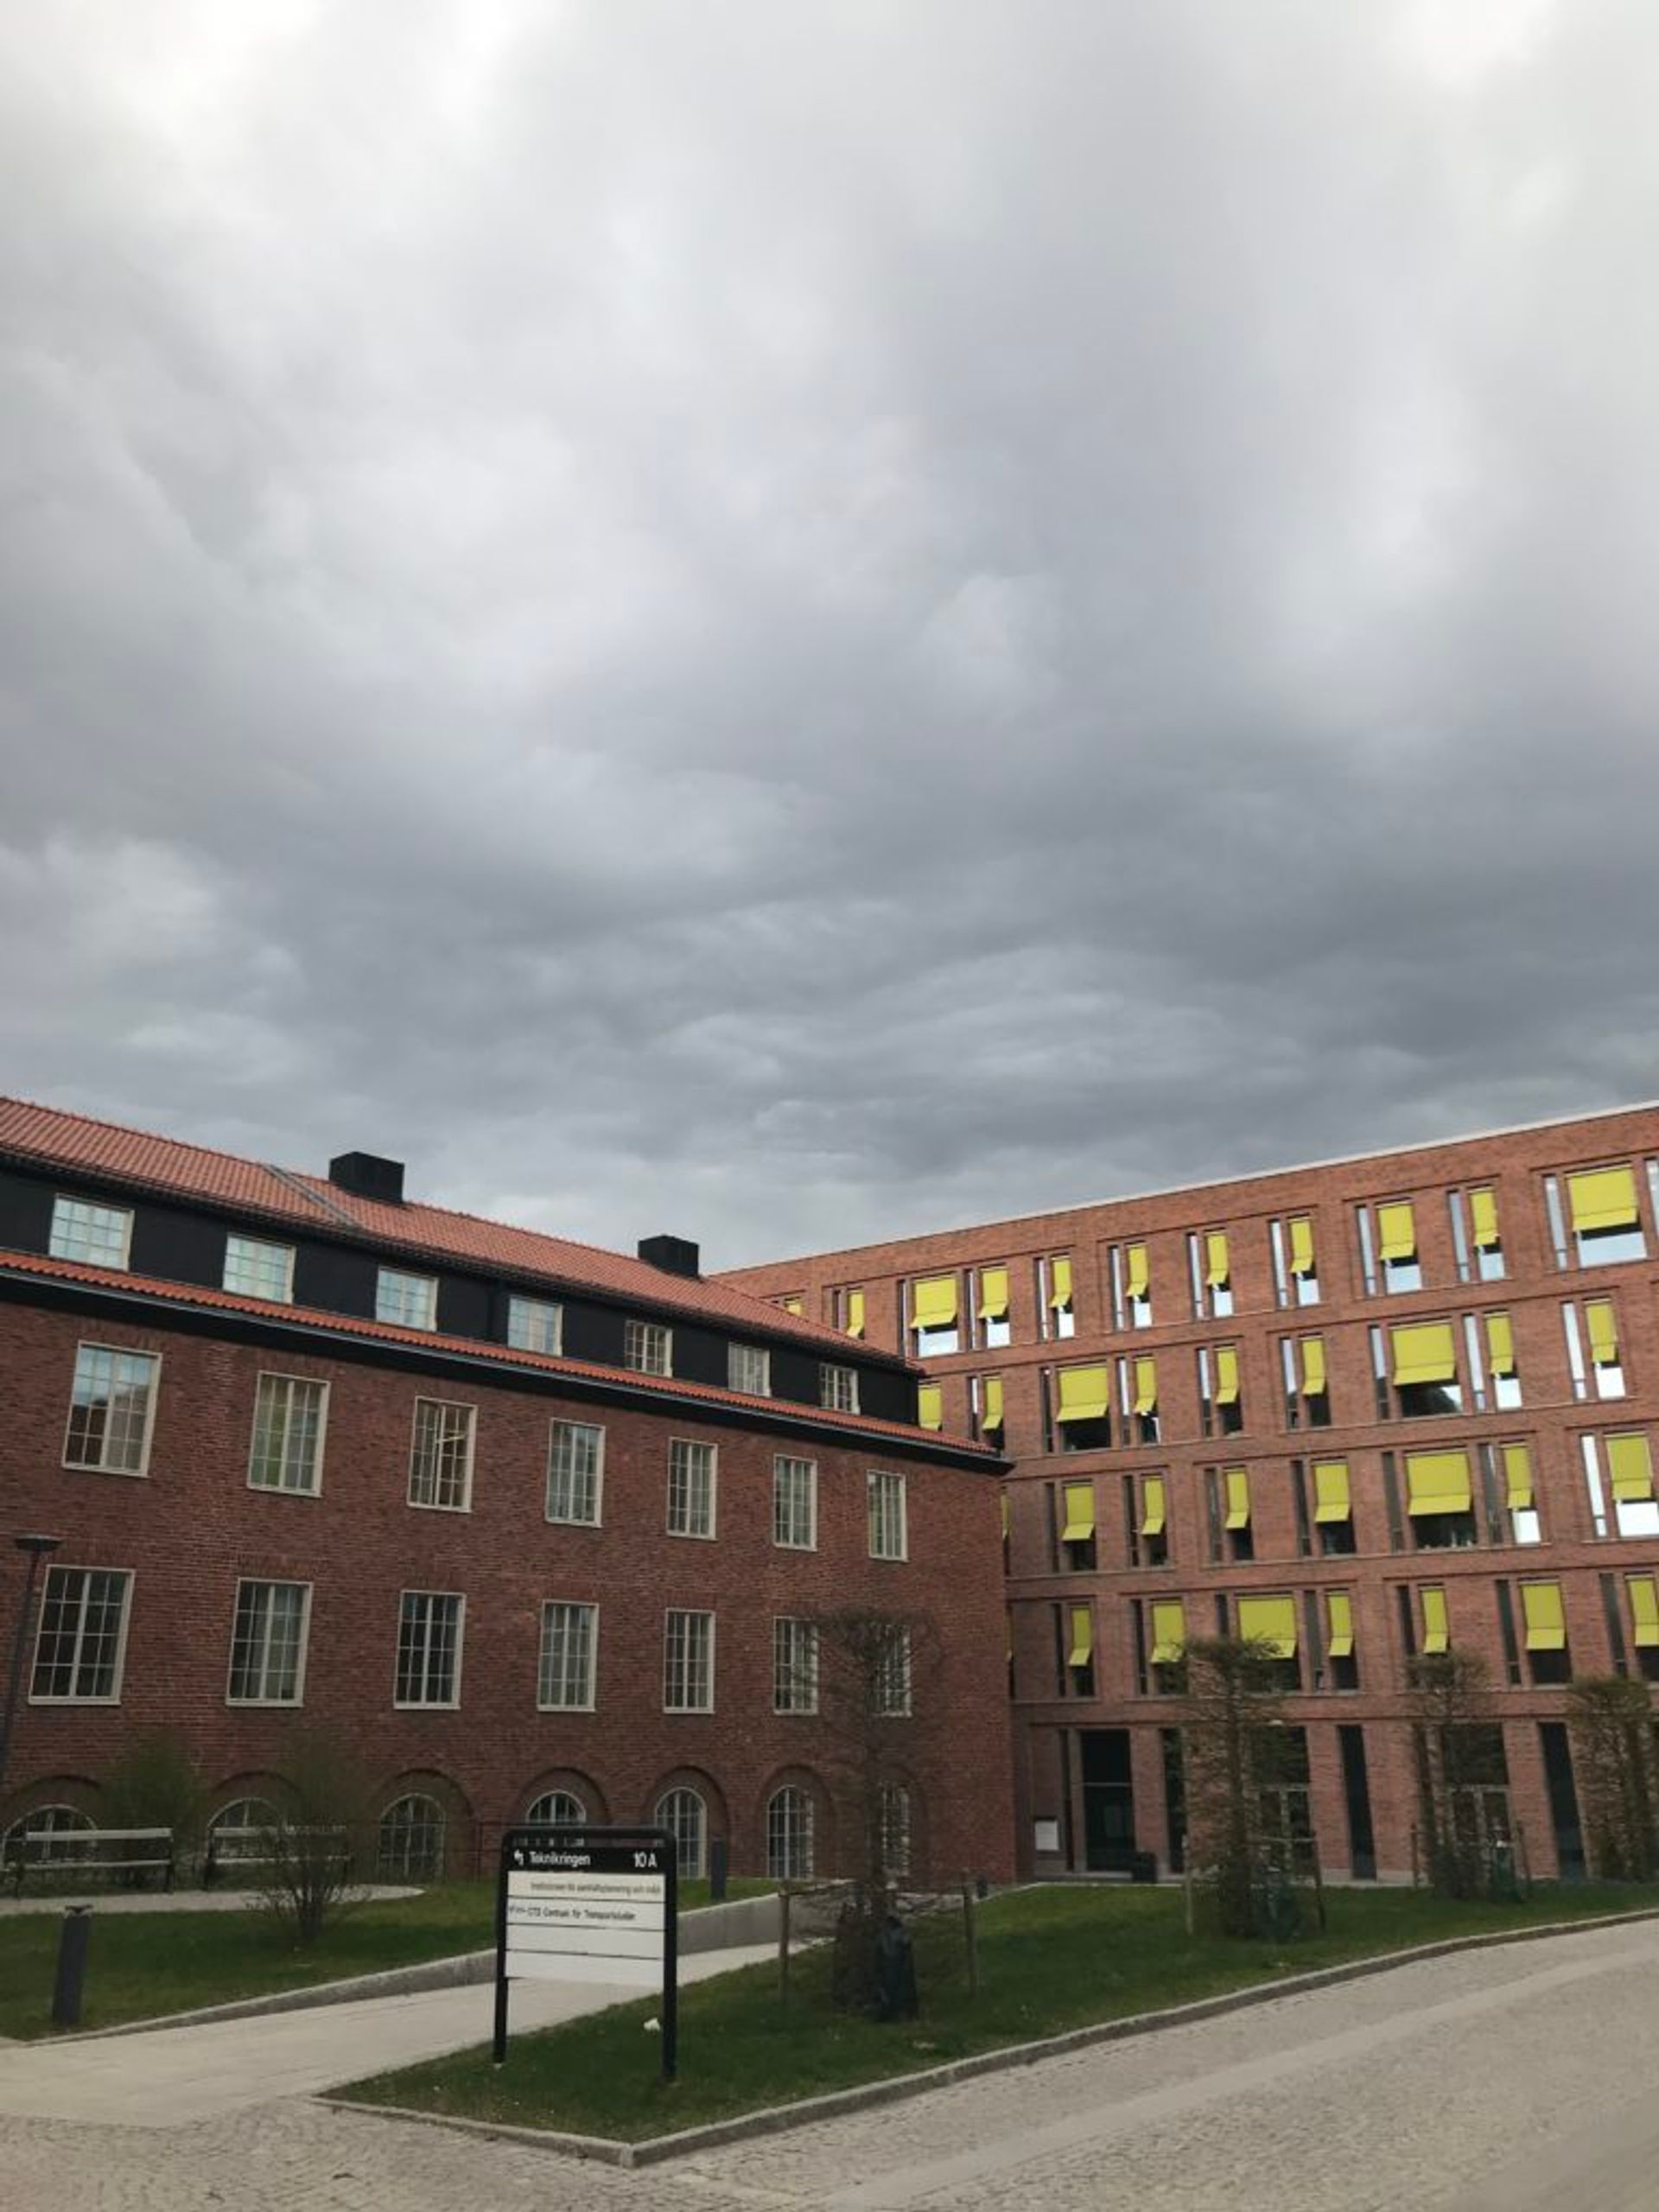 A red-brick university building on a cloudy day.